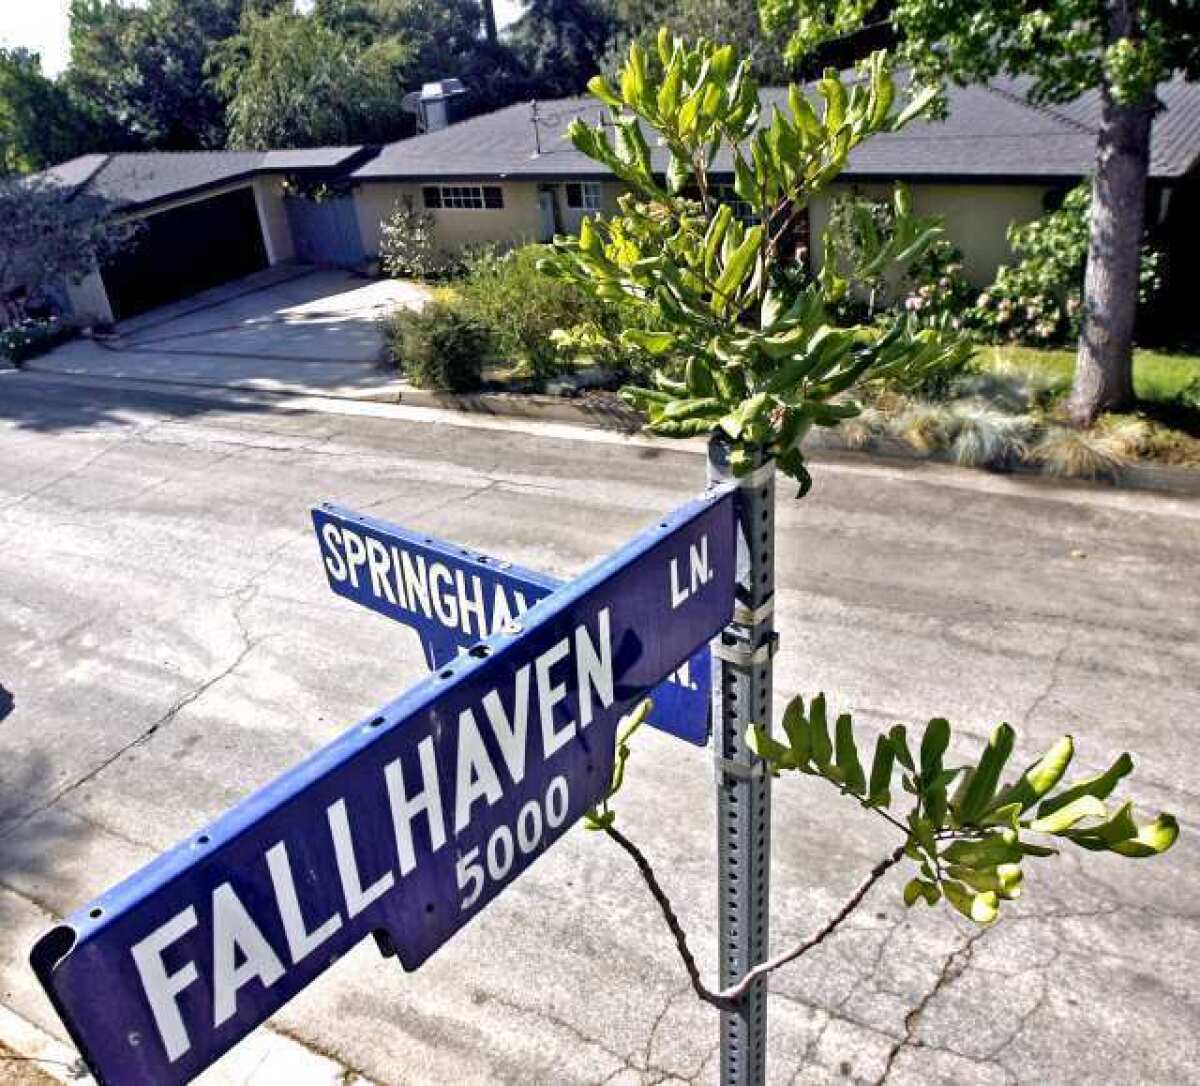 A tree has managed to spring through and out of a metal street post at least nine feet high at the corner of Springhaven and Fallhaven Lanes in La Canada Flintridge.